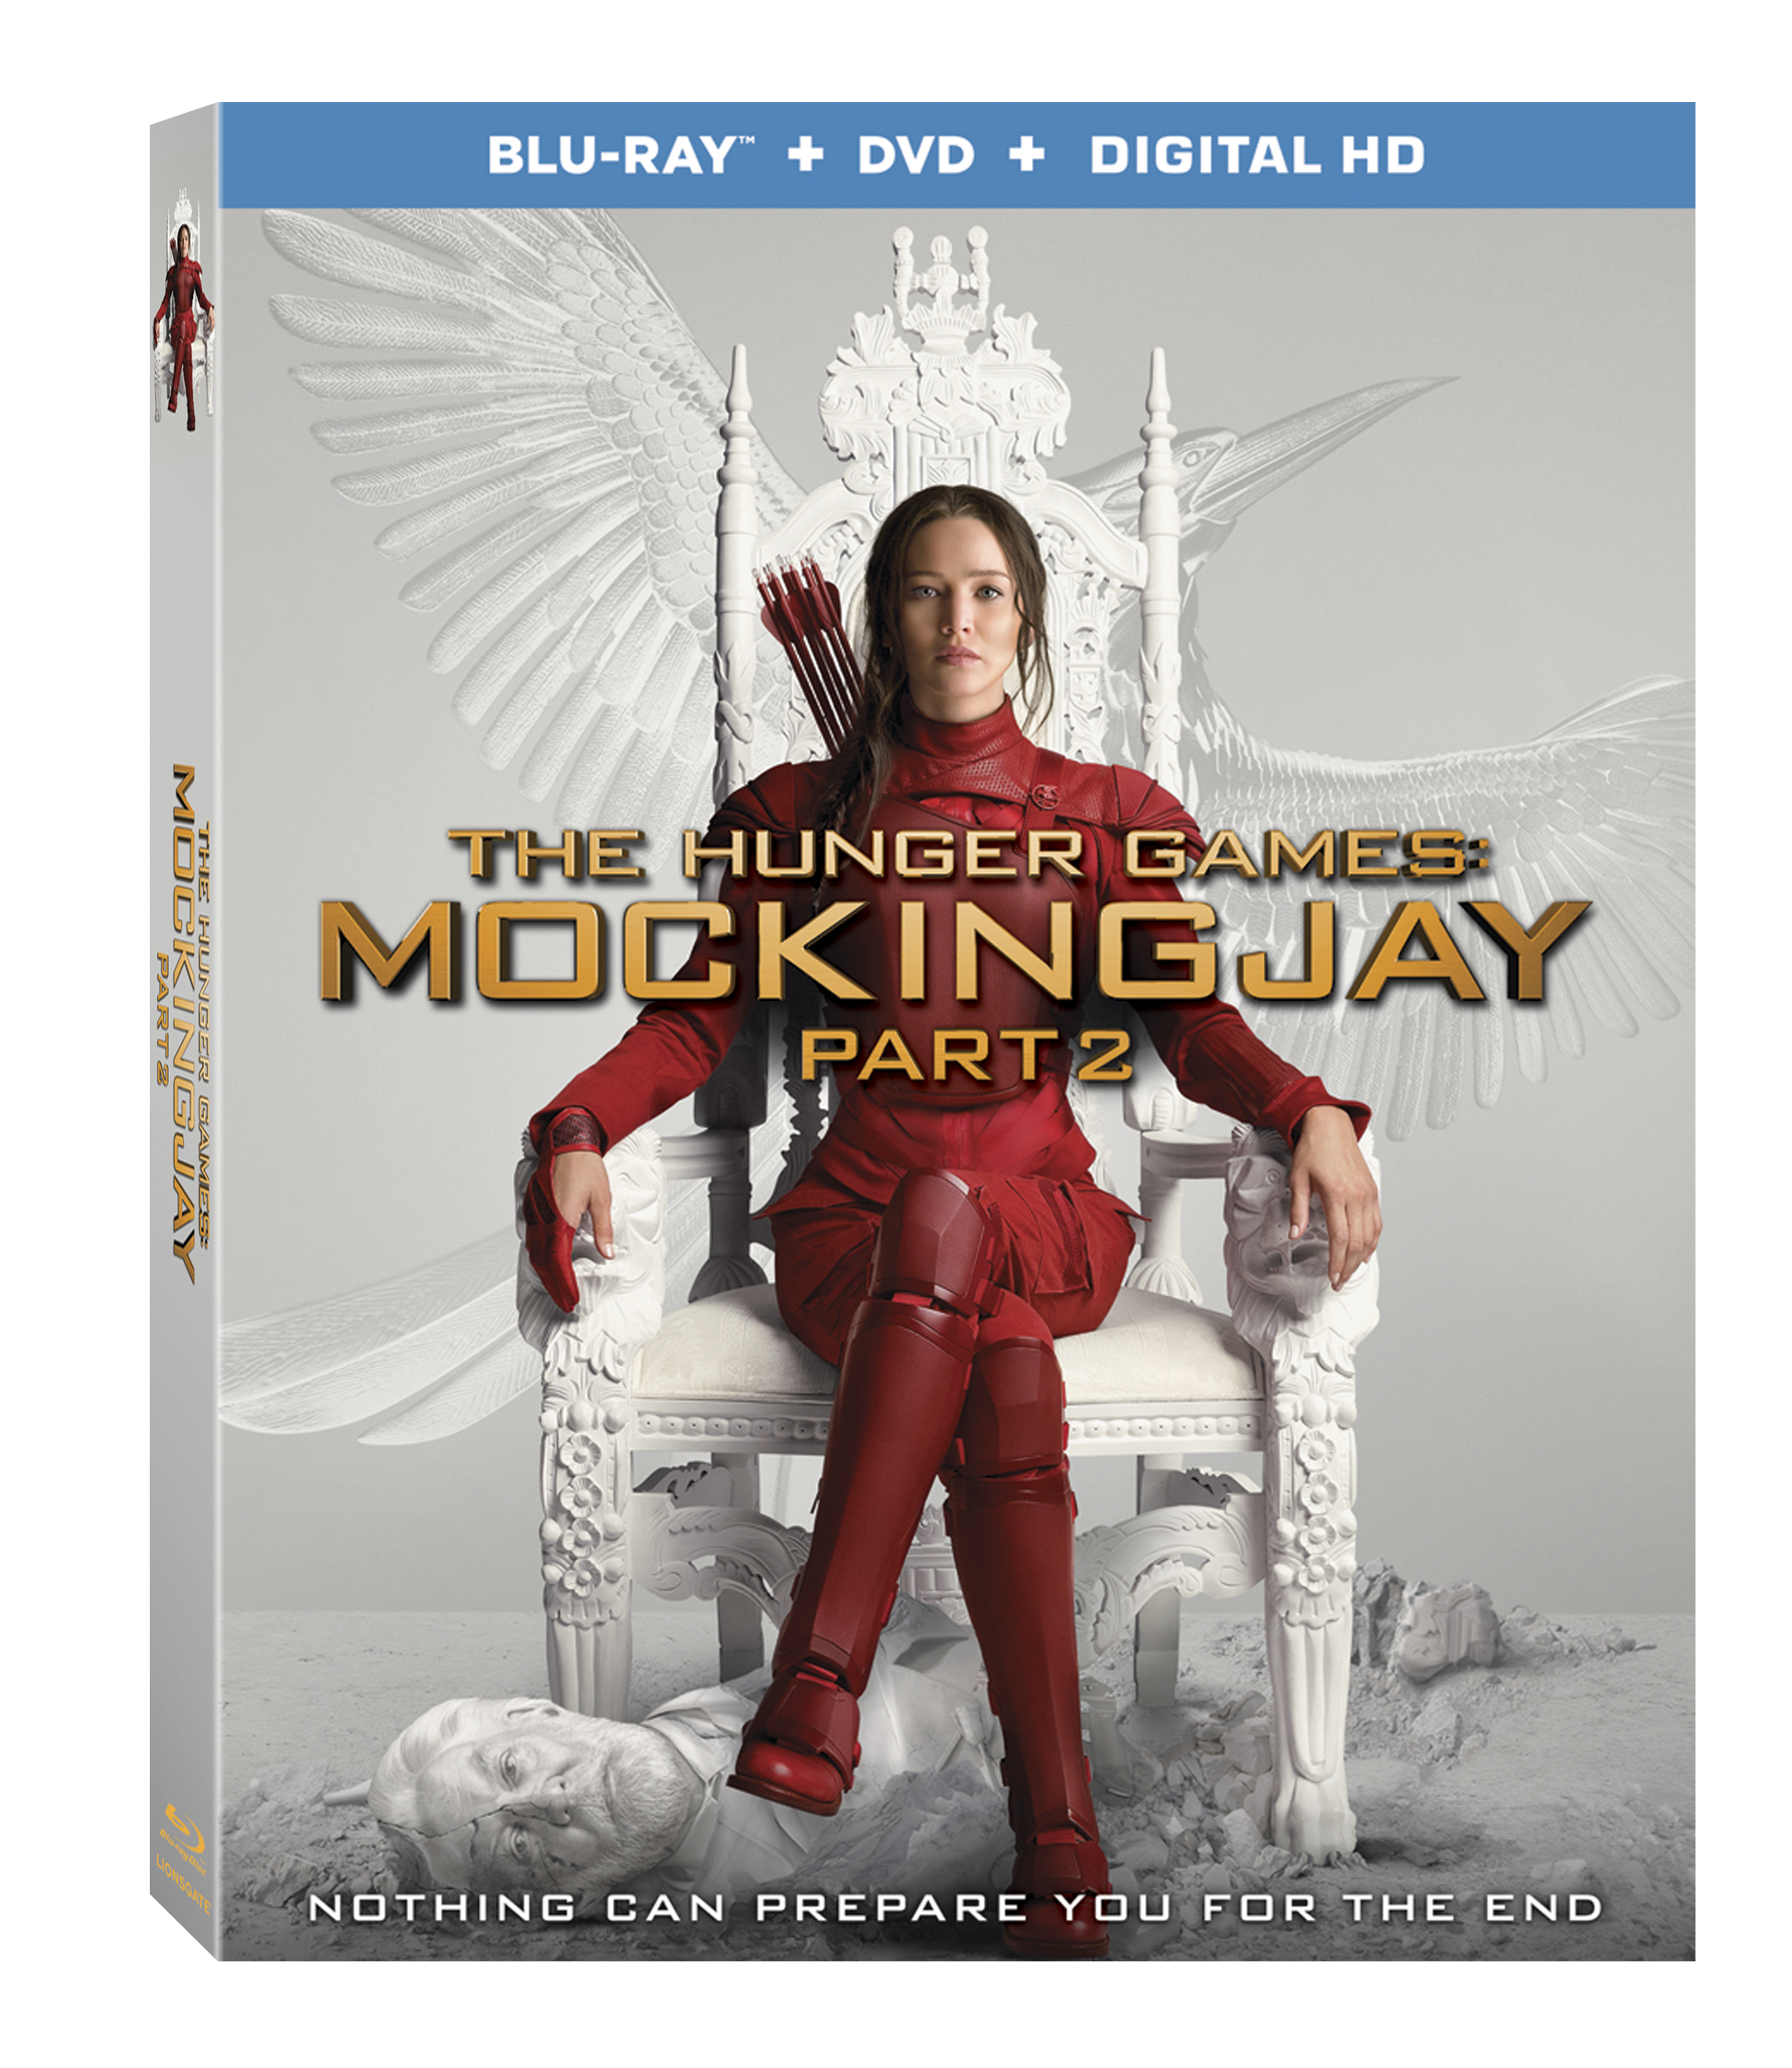 The Hunger Games Mockingjay Part 2 Release Date Announced for Bluray